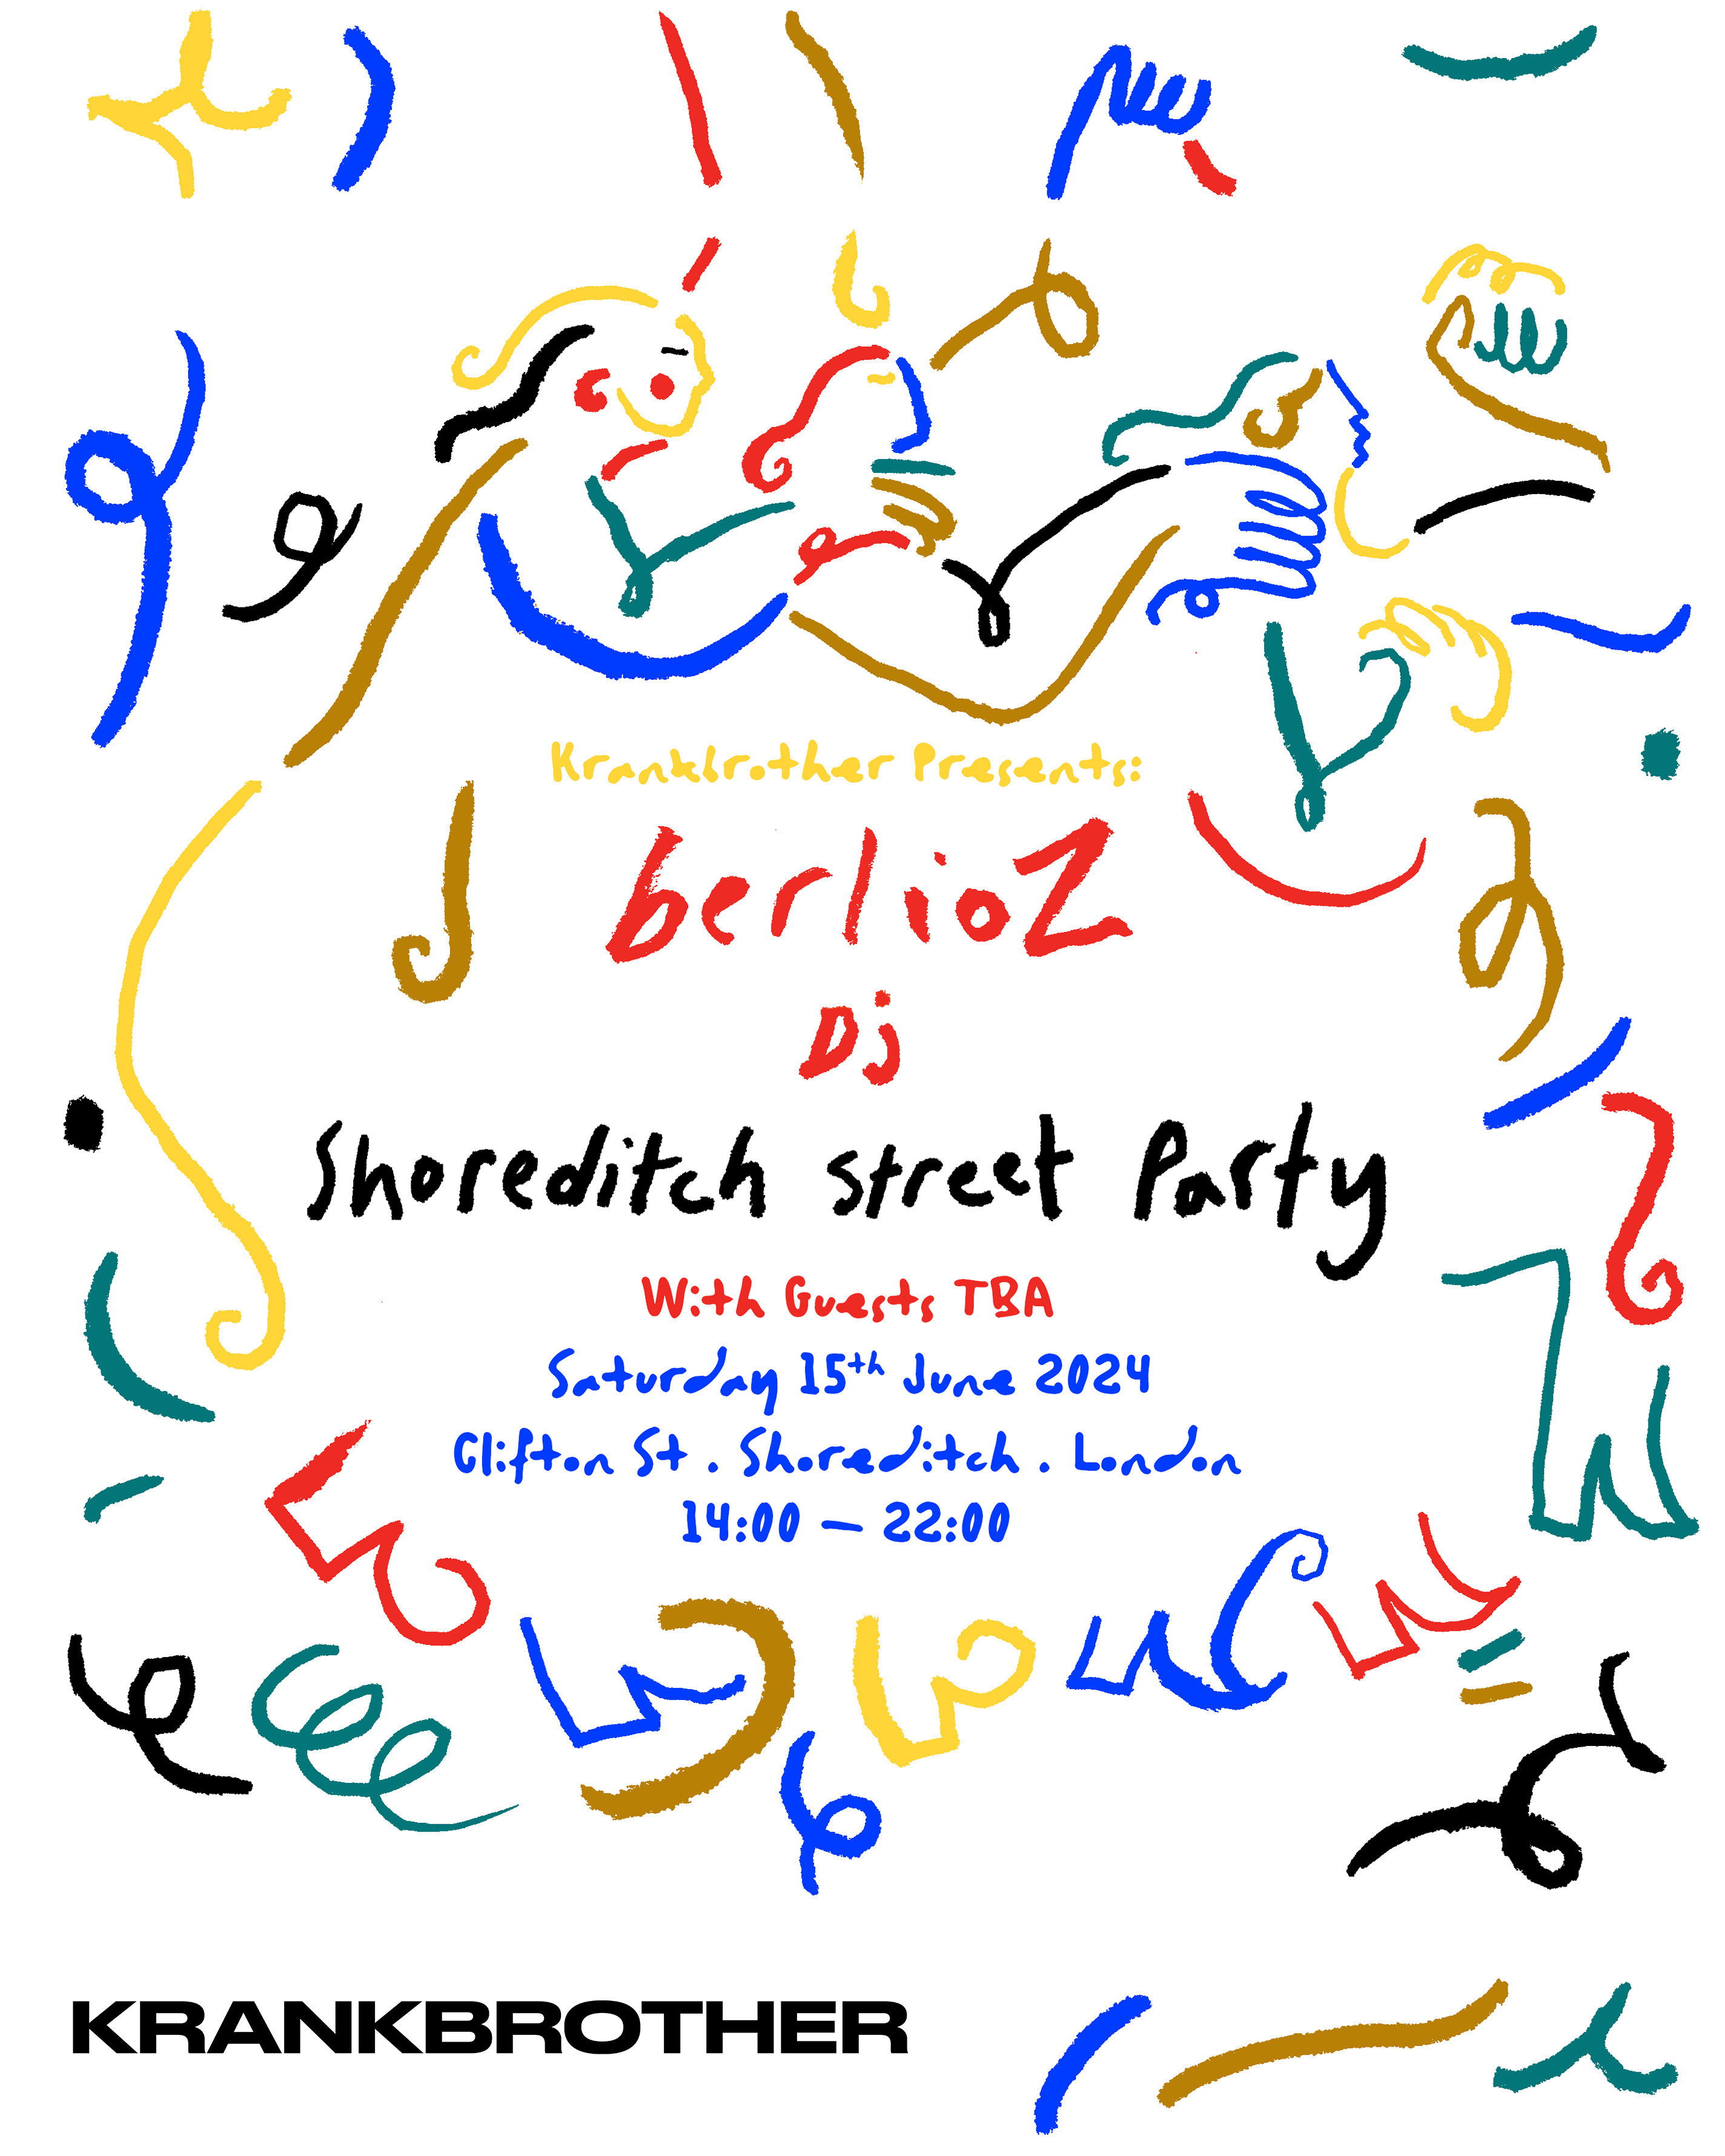 [SOLD OUT] krankbrother presents: berlioz Shoreditch Street Party - Página frontal